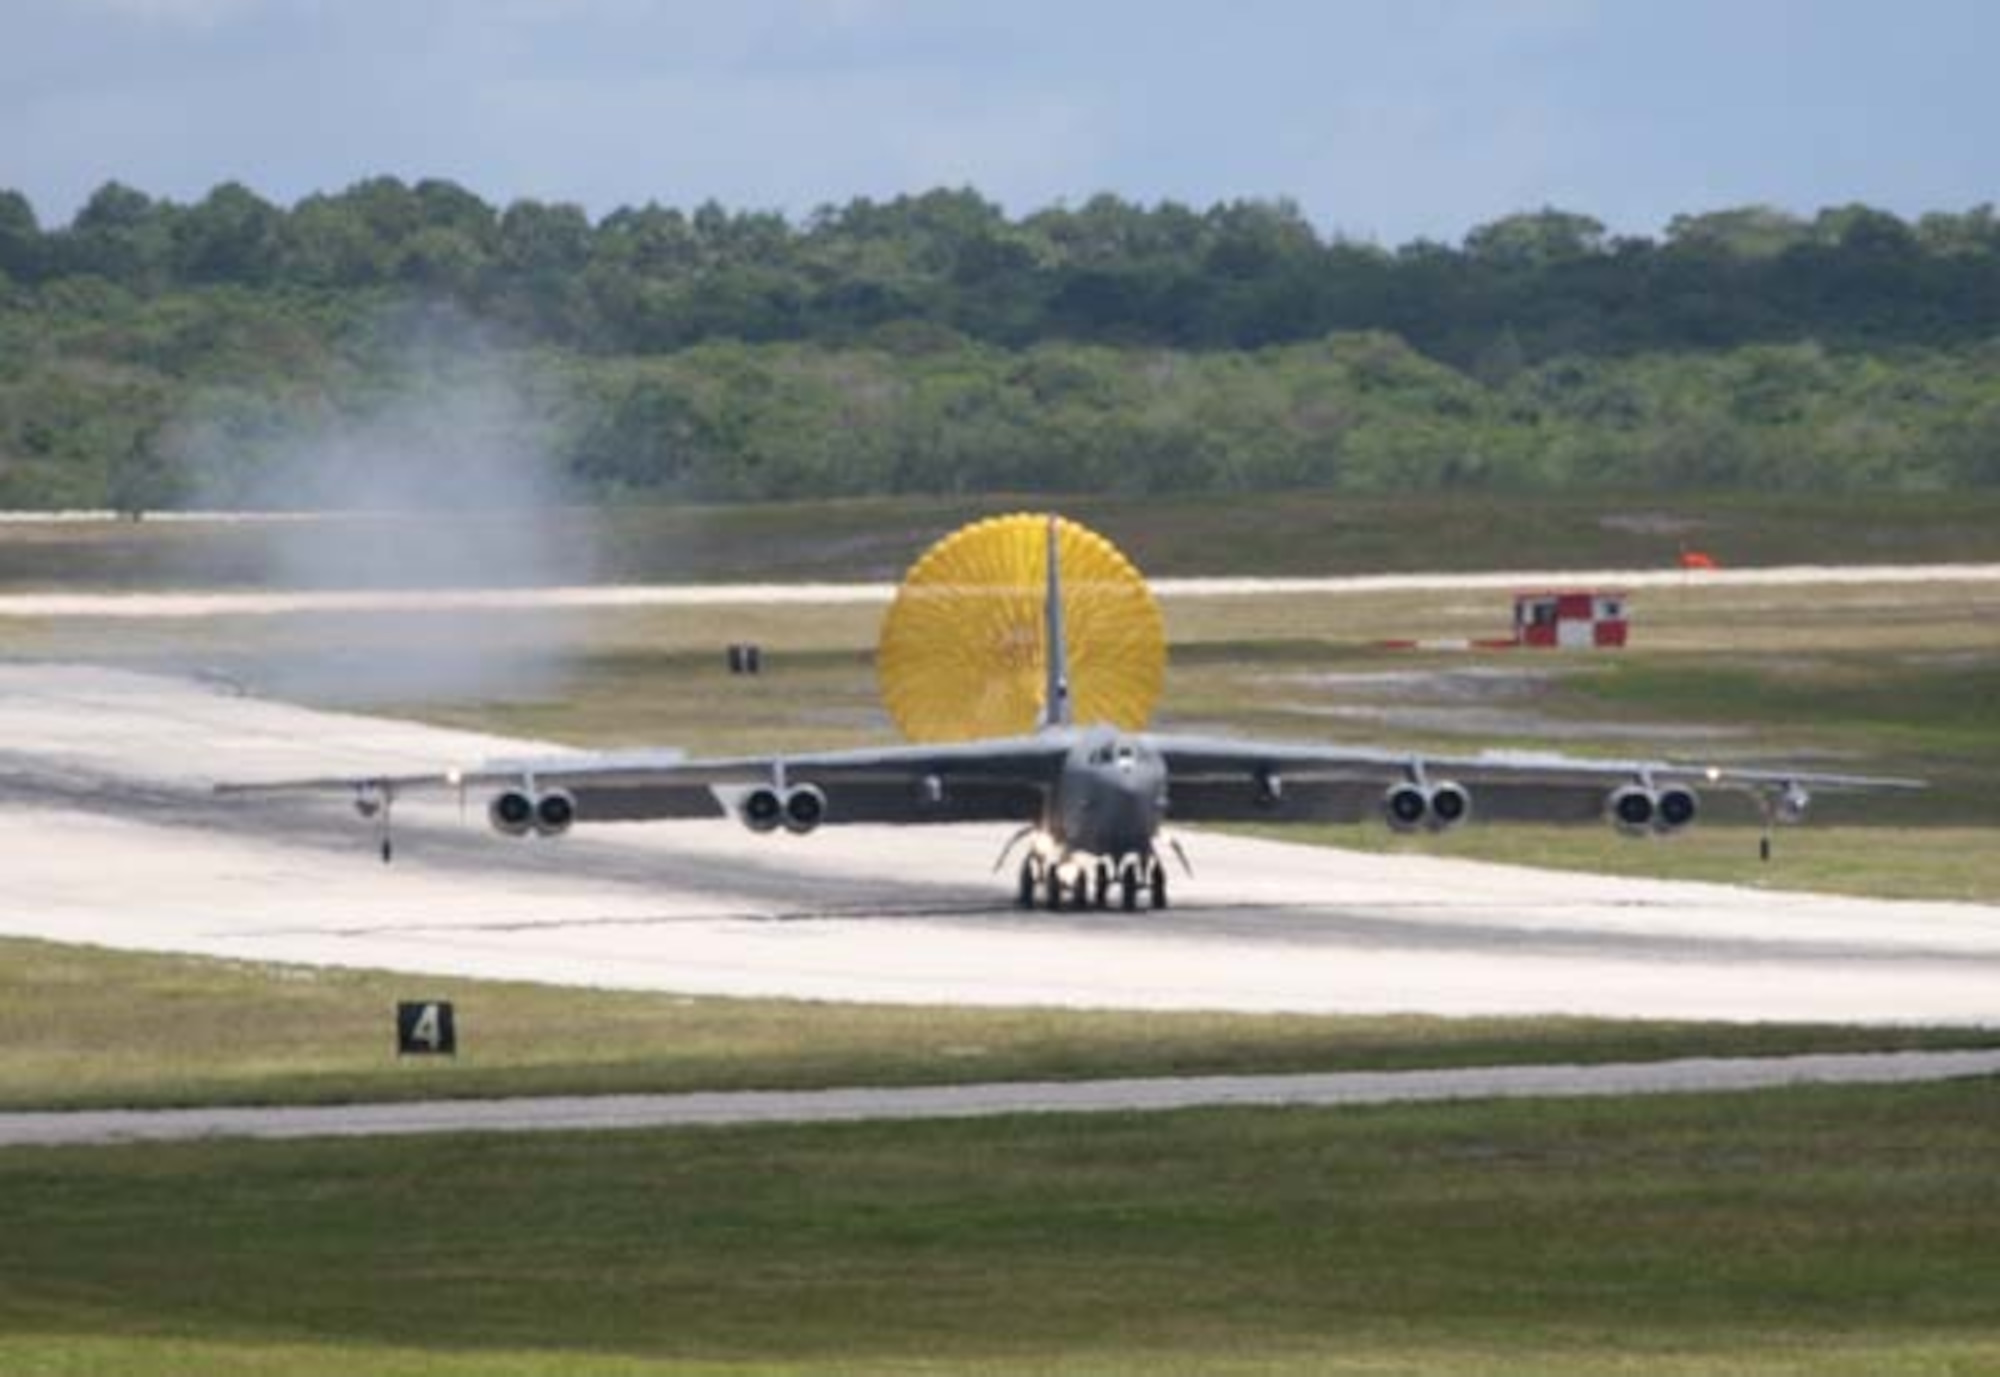 ANDERSEN AIR FORCE BASE, Guam - A B-52H deployts its drogue chute after landing at Andersen Air Force Base.  The aircraft is deployed from Barksdale AFB, La.  B-52s like the one seen in this picture has been in the Air Force inventory since 1960.  (Photo by Senior Master Sgt. Mahmoud Rasouliyan/ 36th Expeditionary Aircraft Maintenance Squadron)